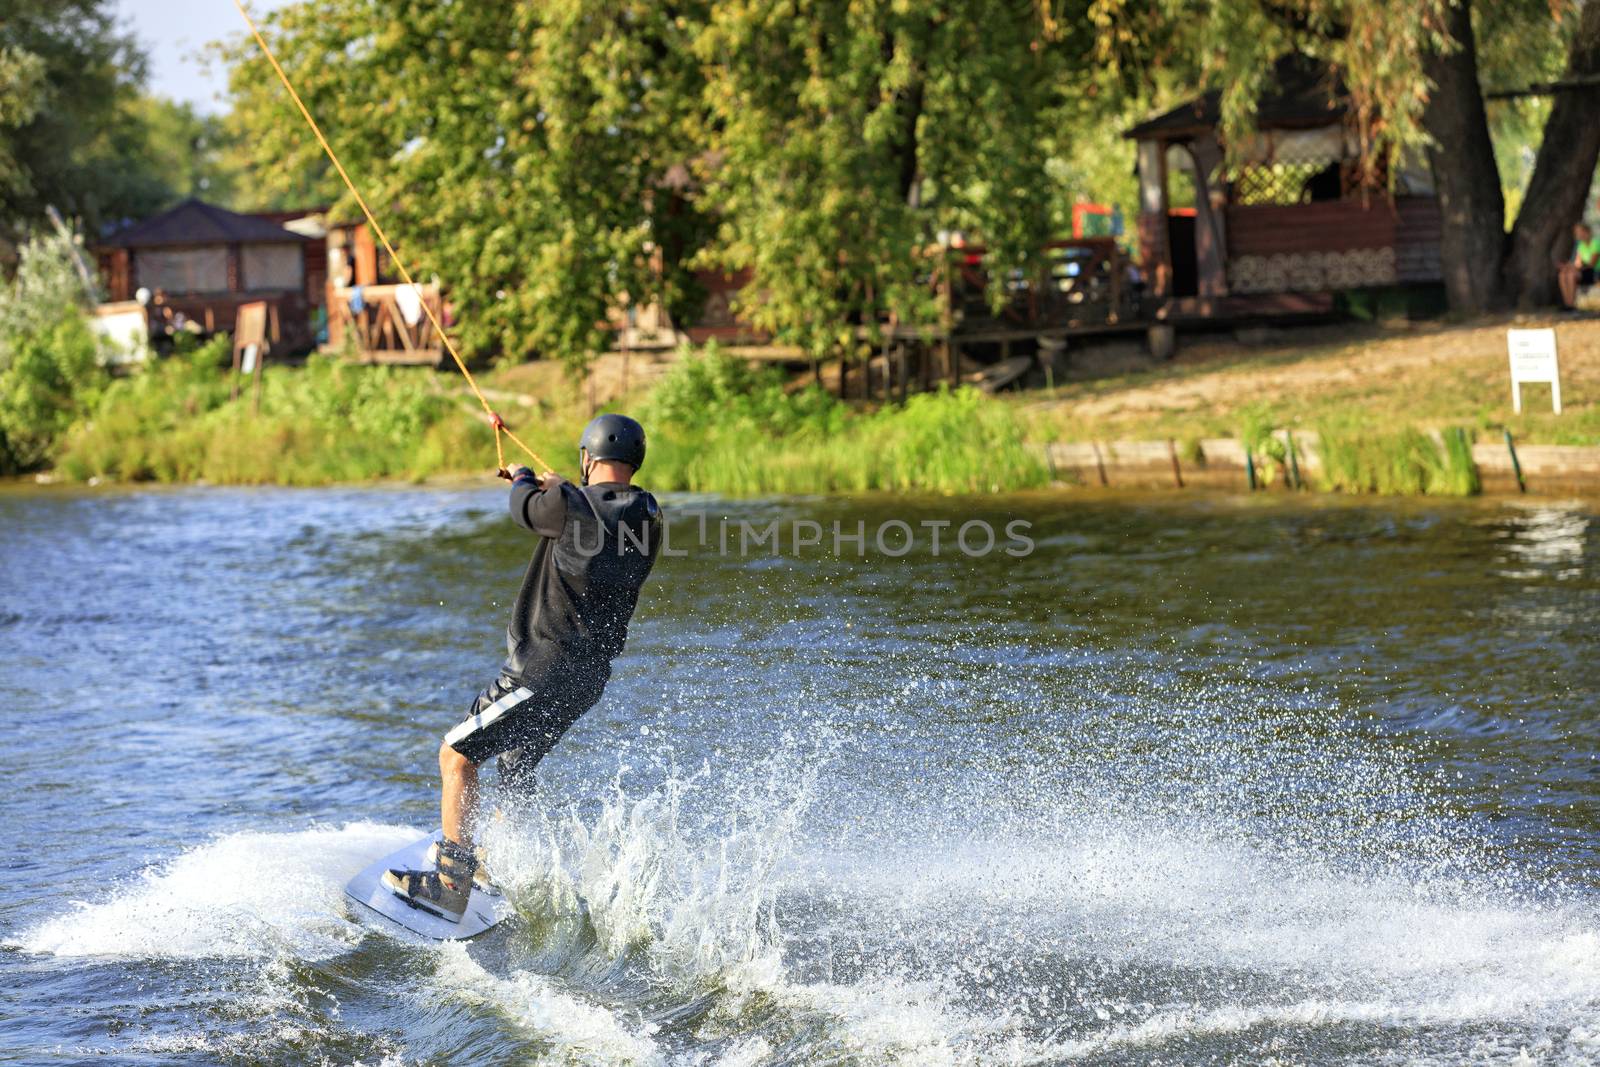 A wakeboarder rushes through the water along the riverbank, holding the cable with both hands and leaving behind a spray of water and a seething trail.